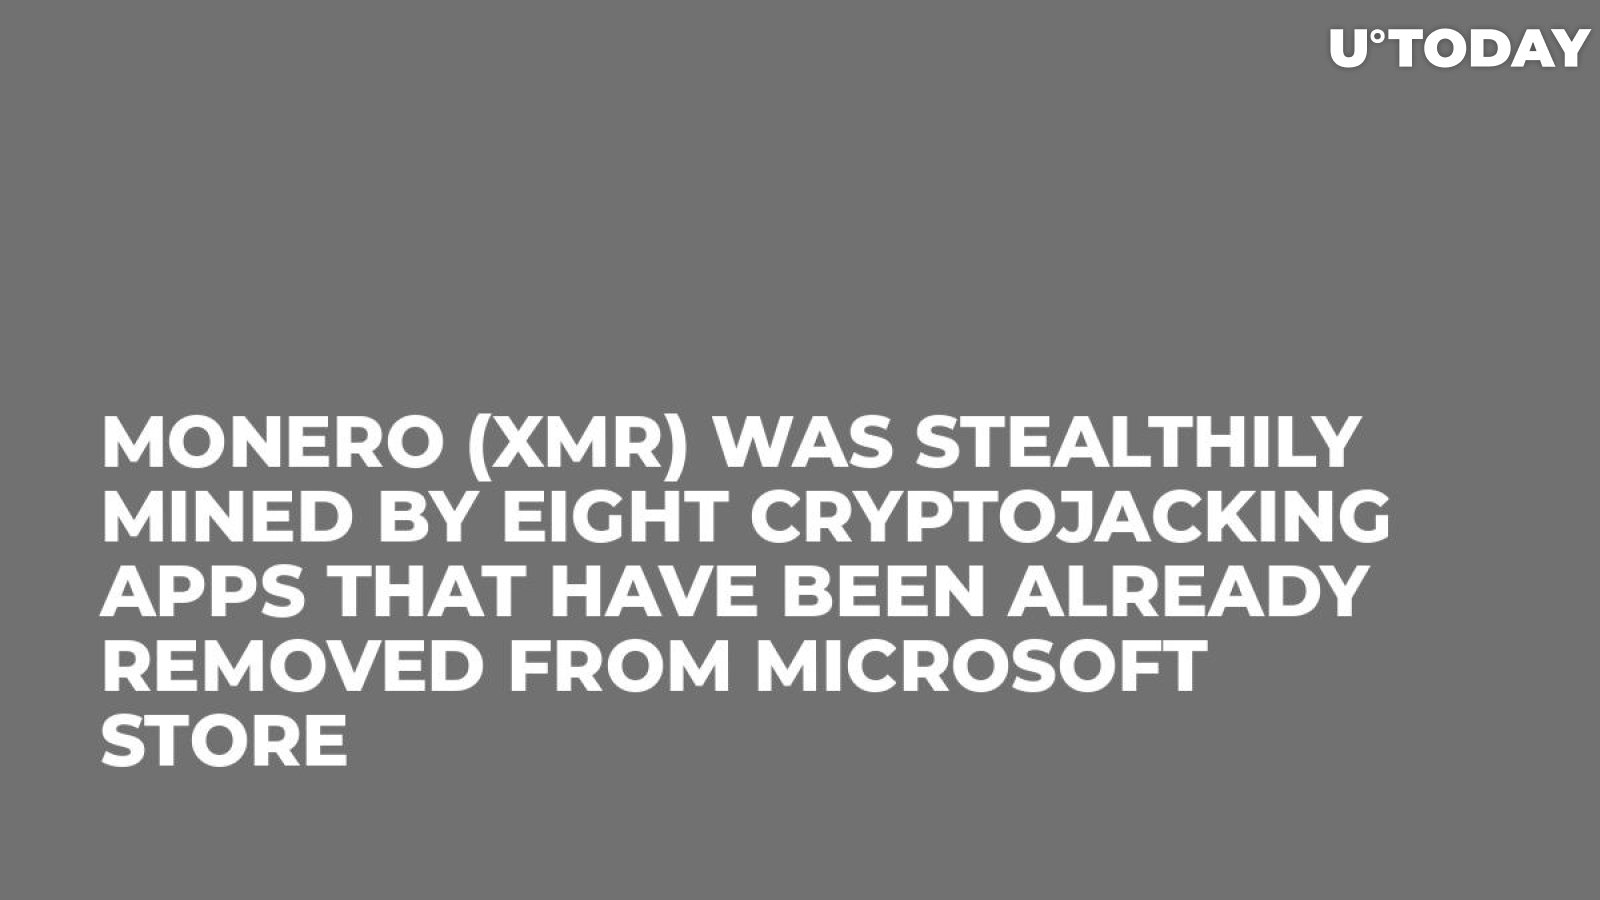 Monero (XMR) Was Stealthily Mined by Eight Cryptojacking Apps That Have Been Already Removed from Microsoft Store